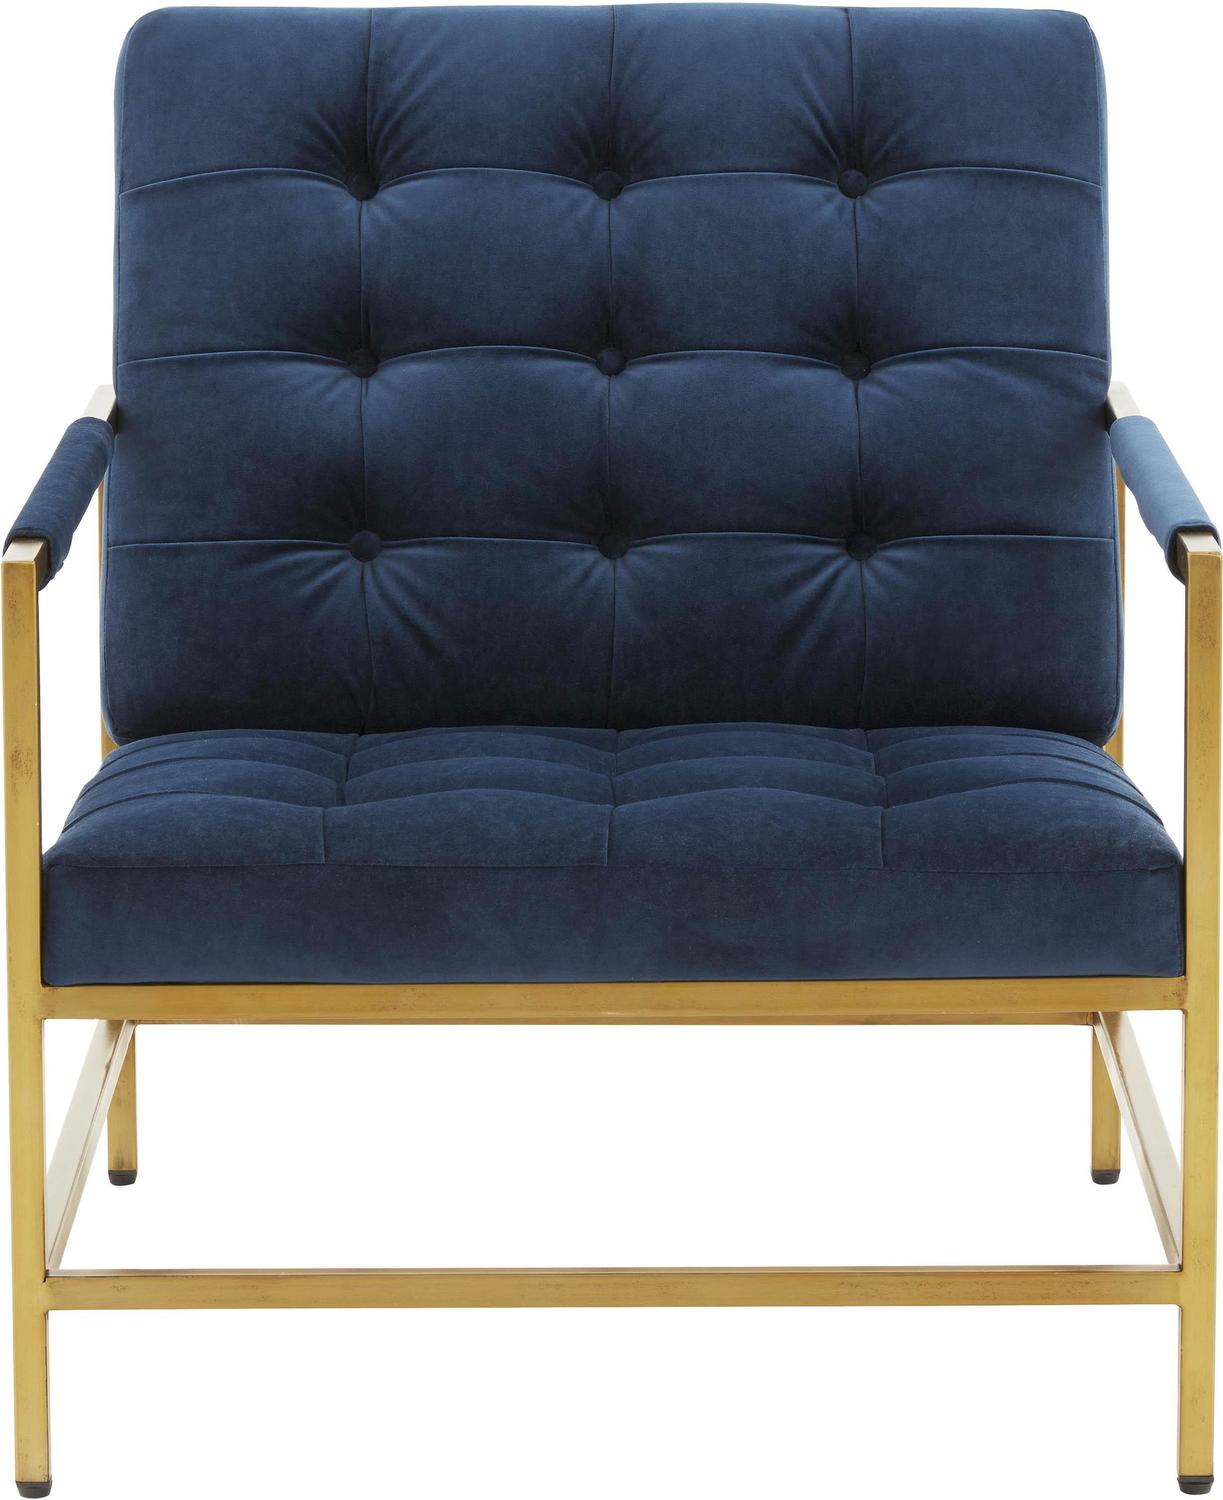 grey arm chairs Tov Furniture Navy